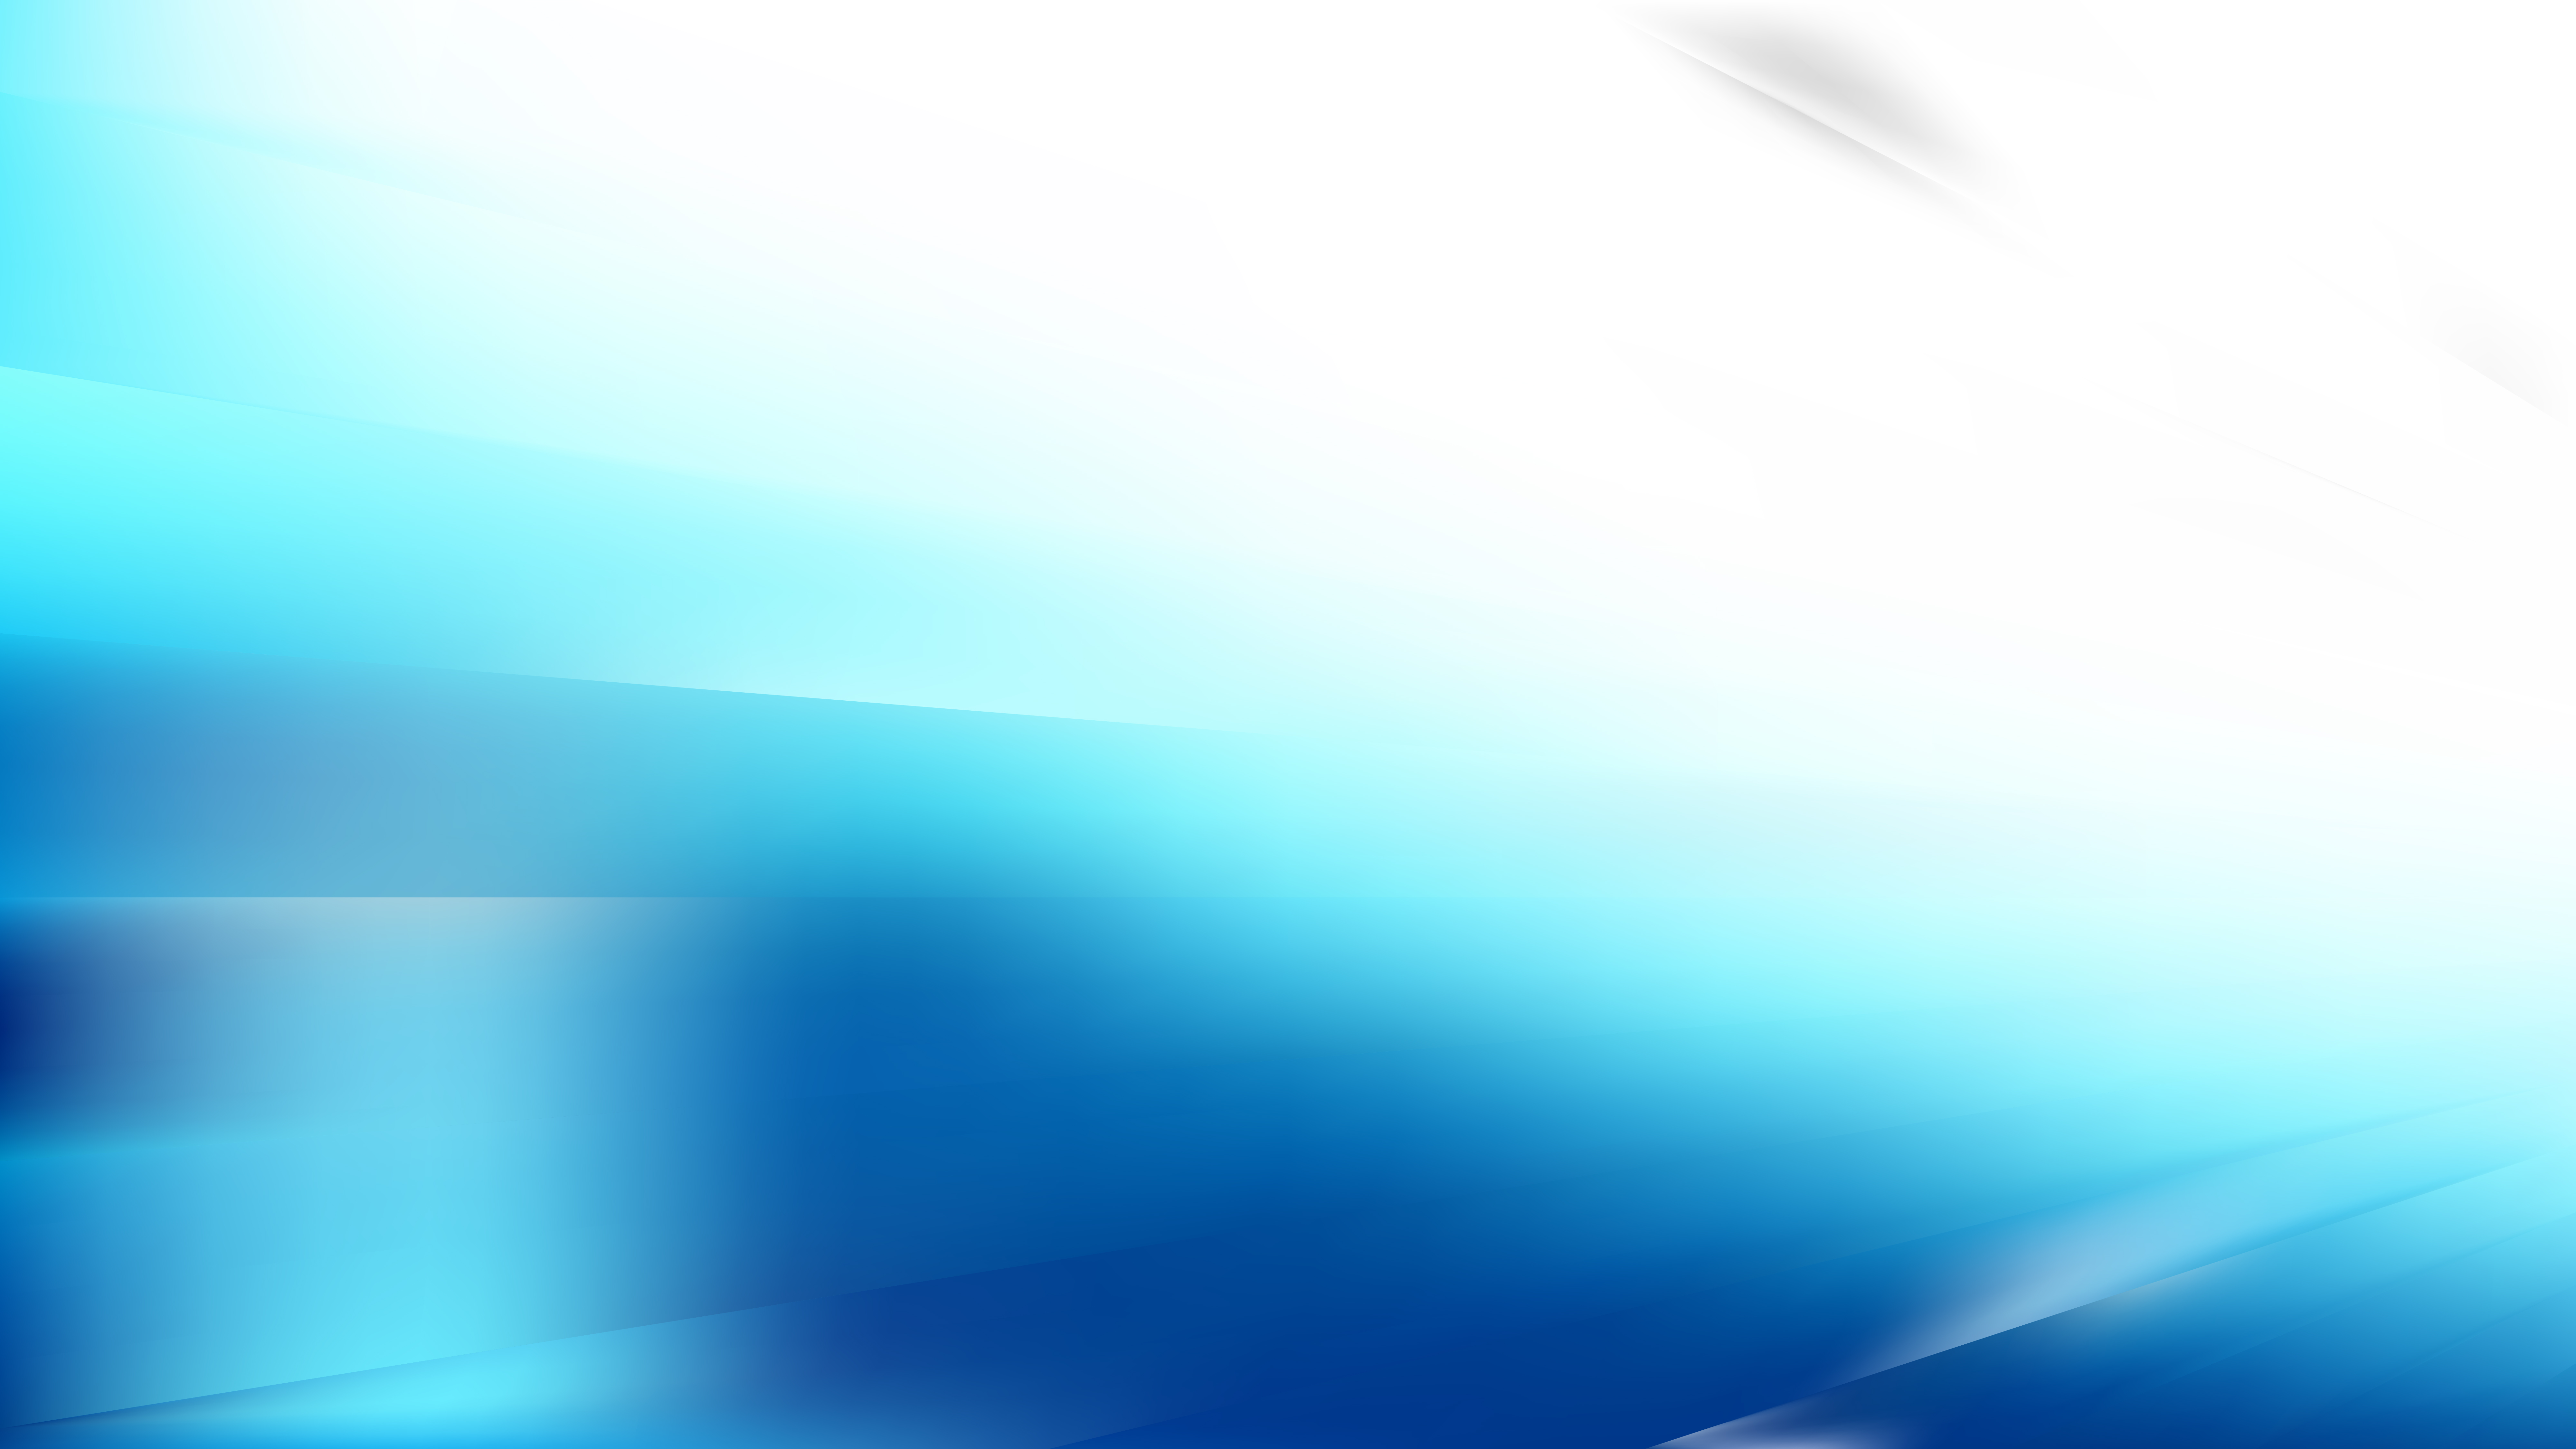 Free Abstract Blue and White Lines Background